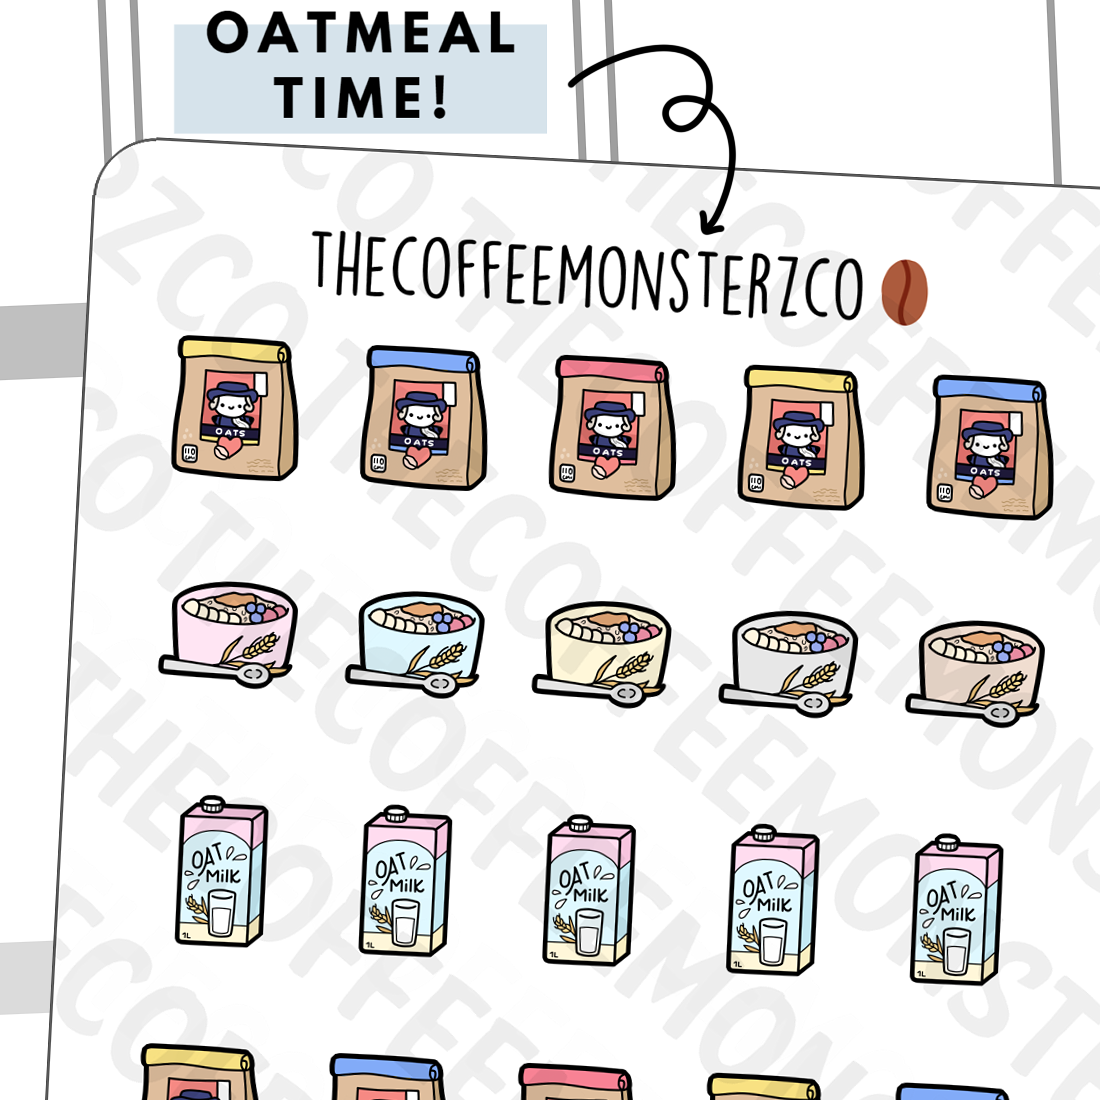 Oatmeal Doodles - TheCoffeeMonsterzCo